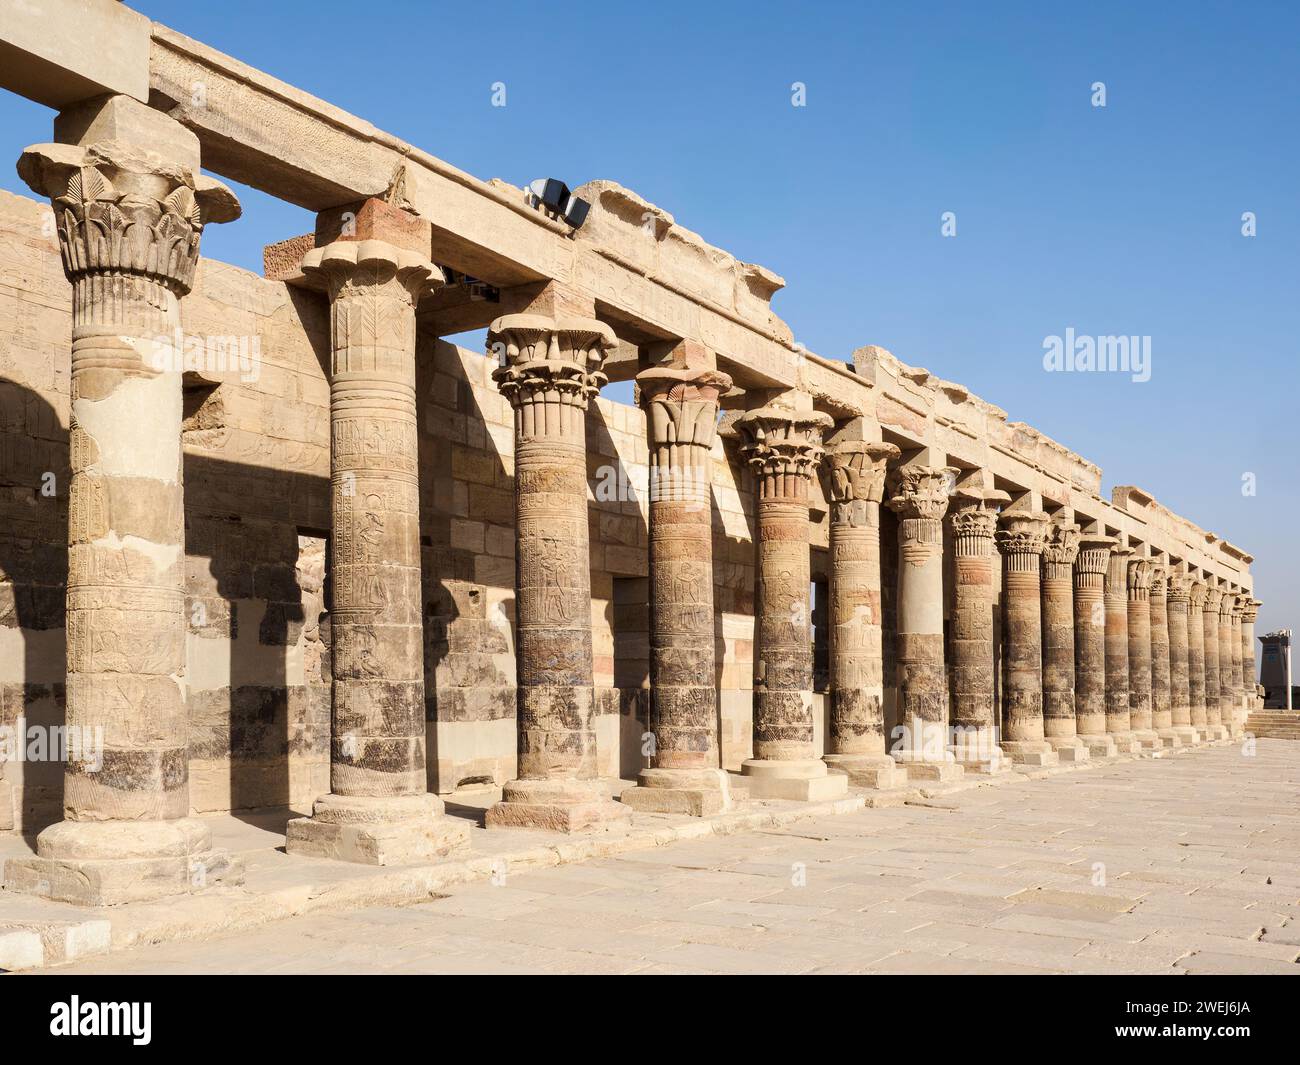 Columns at the Philae temple complex, The Temple of Isis, currently on the island of Agilkia, Egypt. Stock Photo